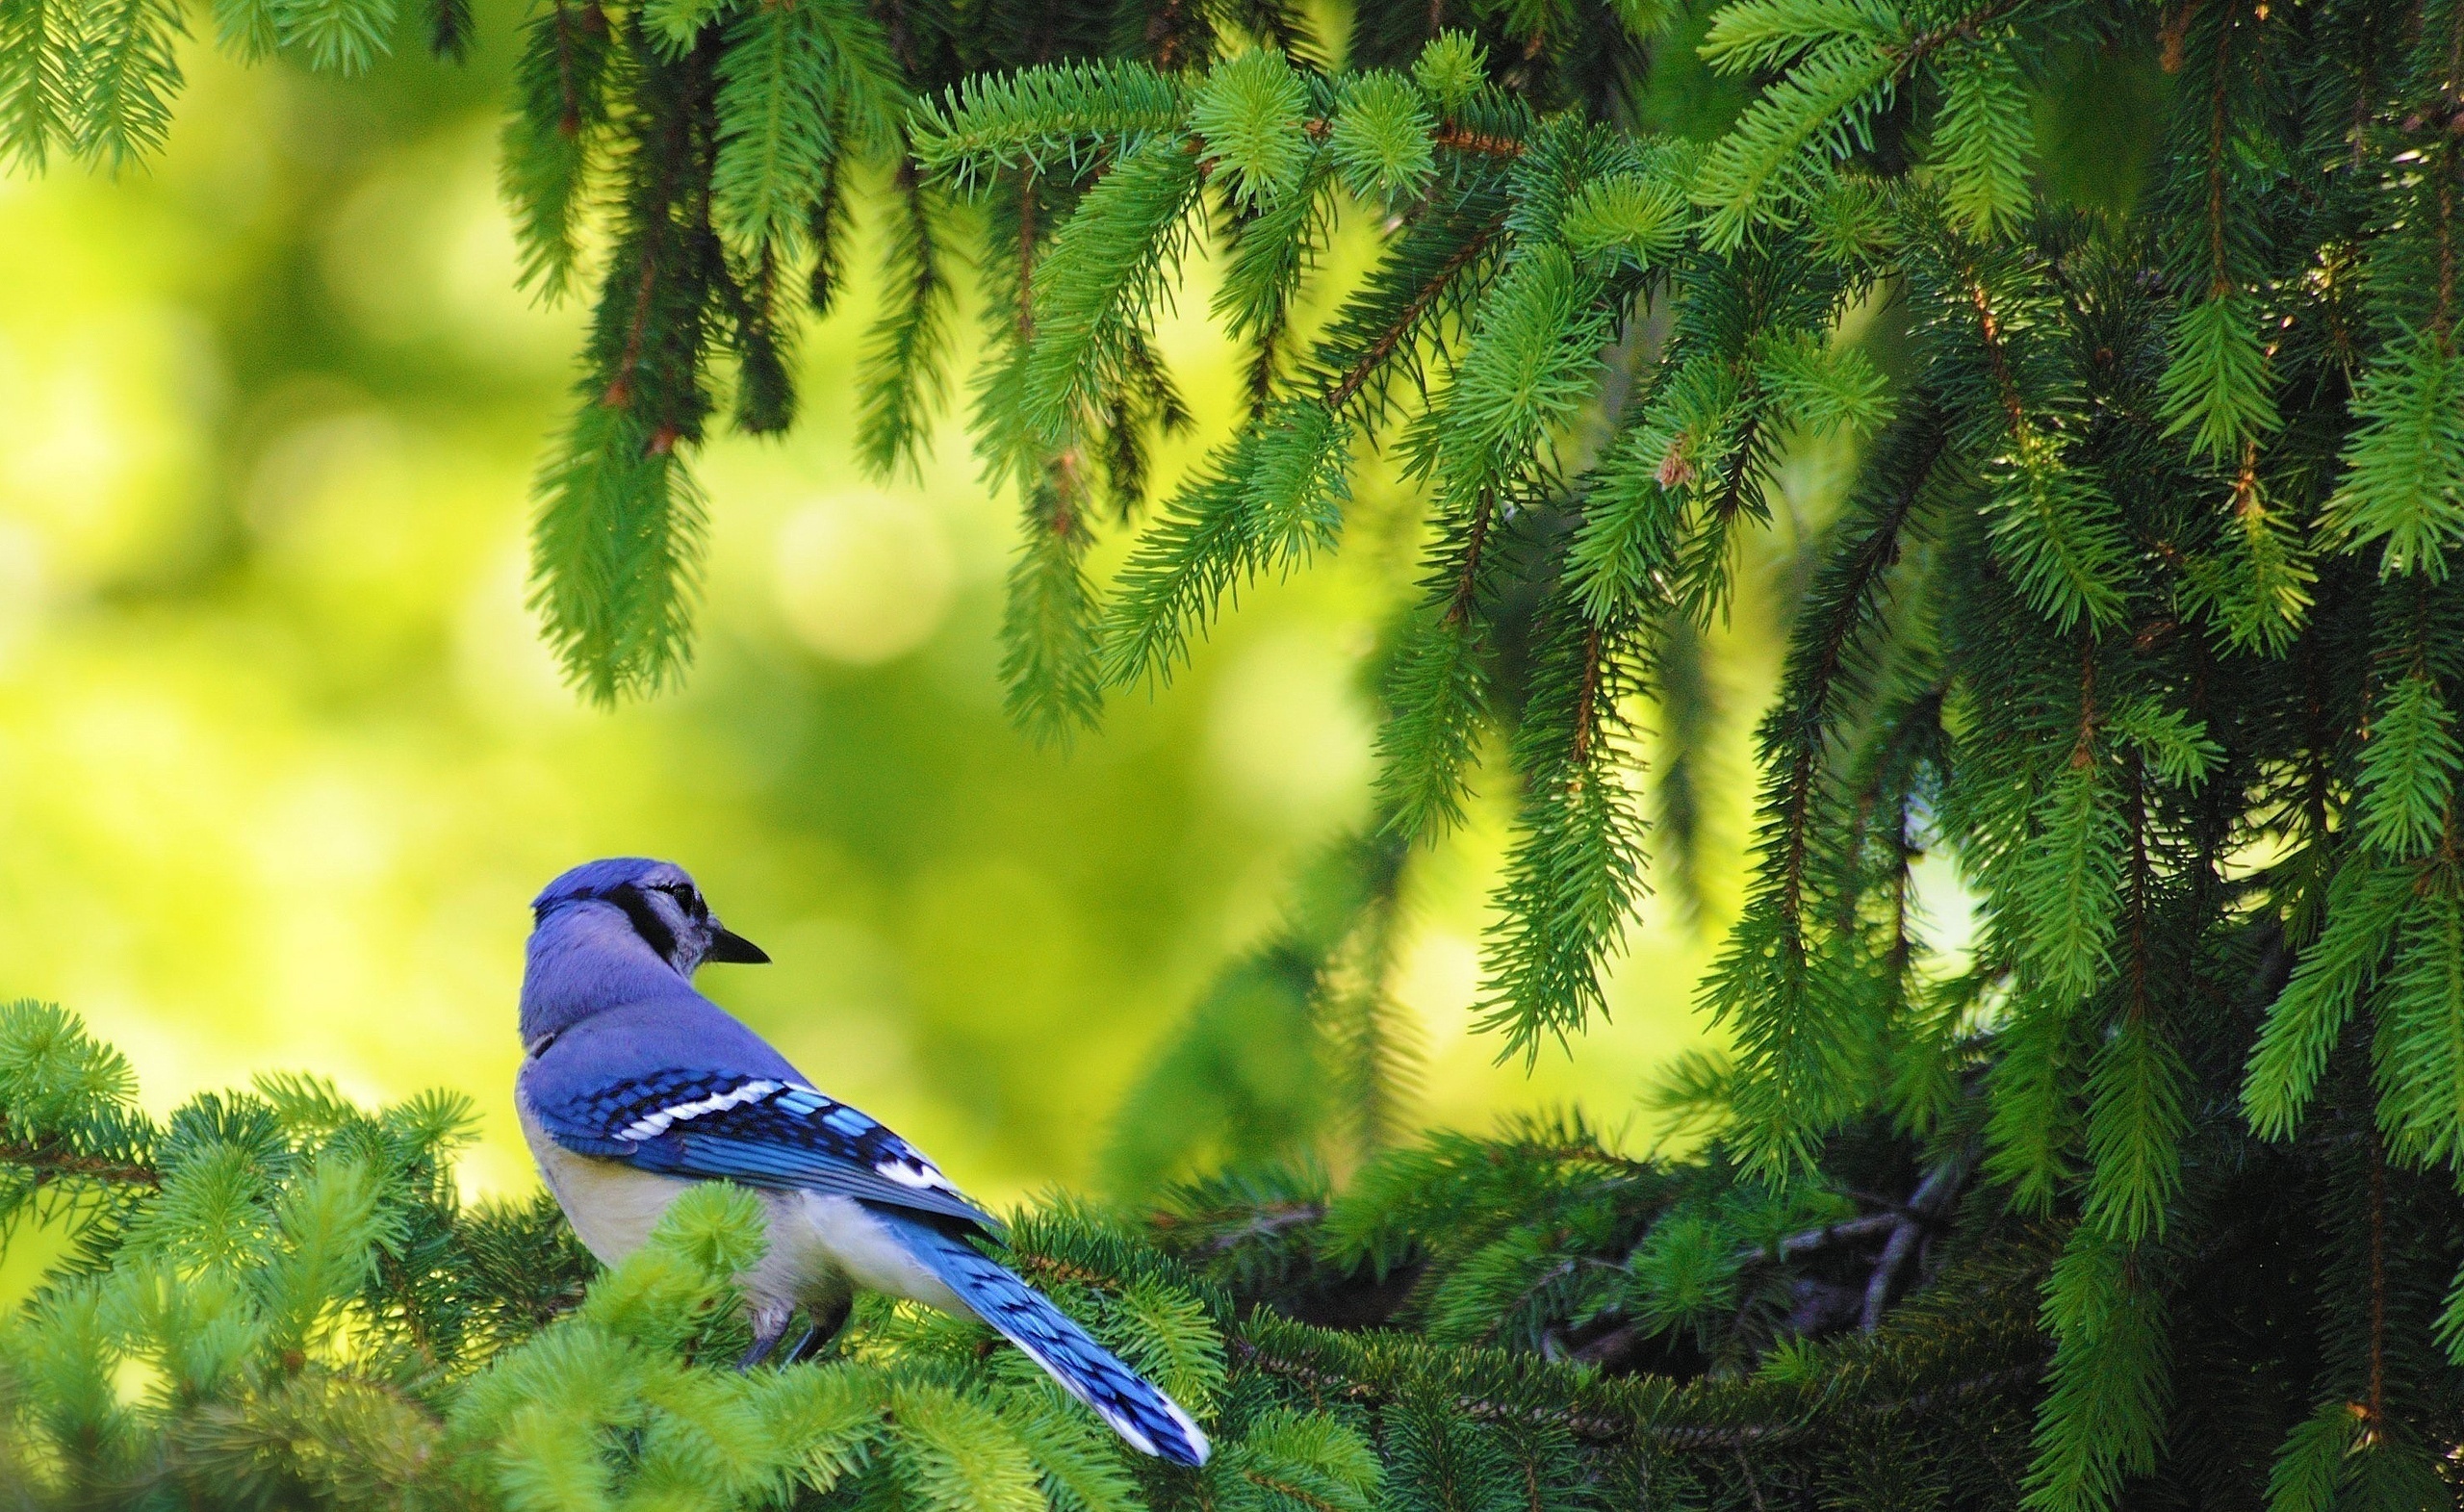 Bird perched on spruce, Natural habitat, Serene nature, Branches in focus, 2560x1580 HD Desktop